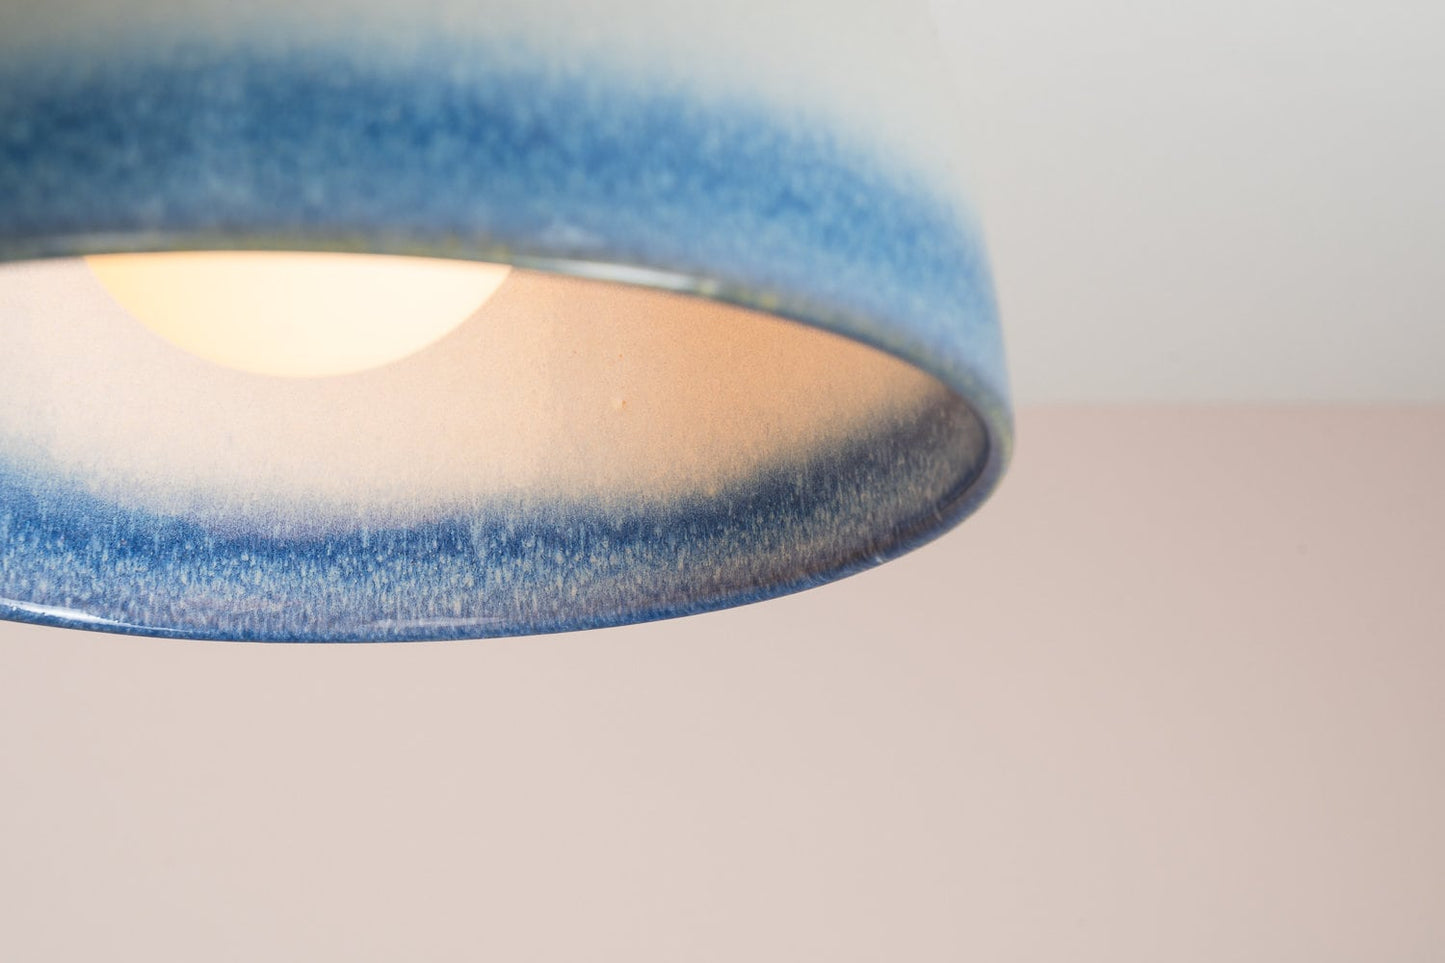 Element pendant light in ceramic and oak - small: blue and white by StudioHaran